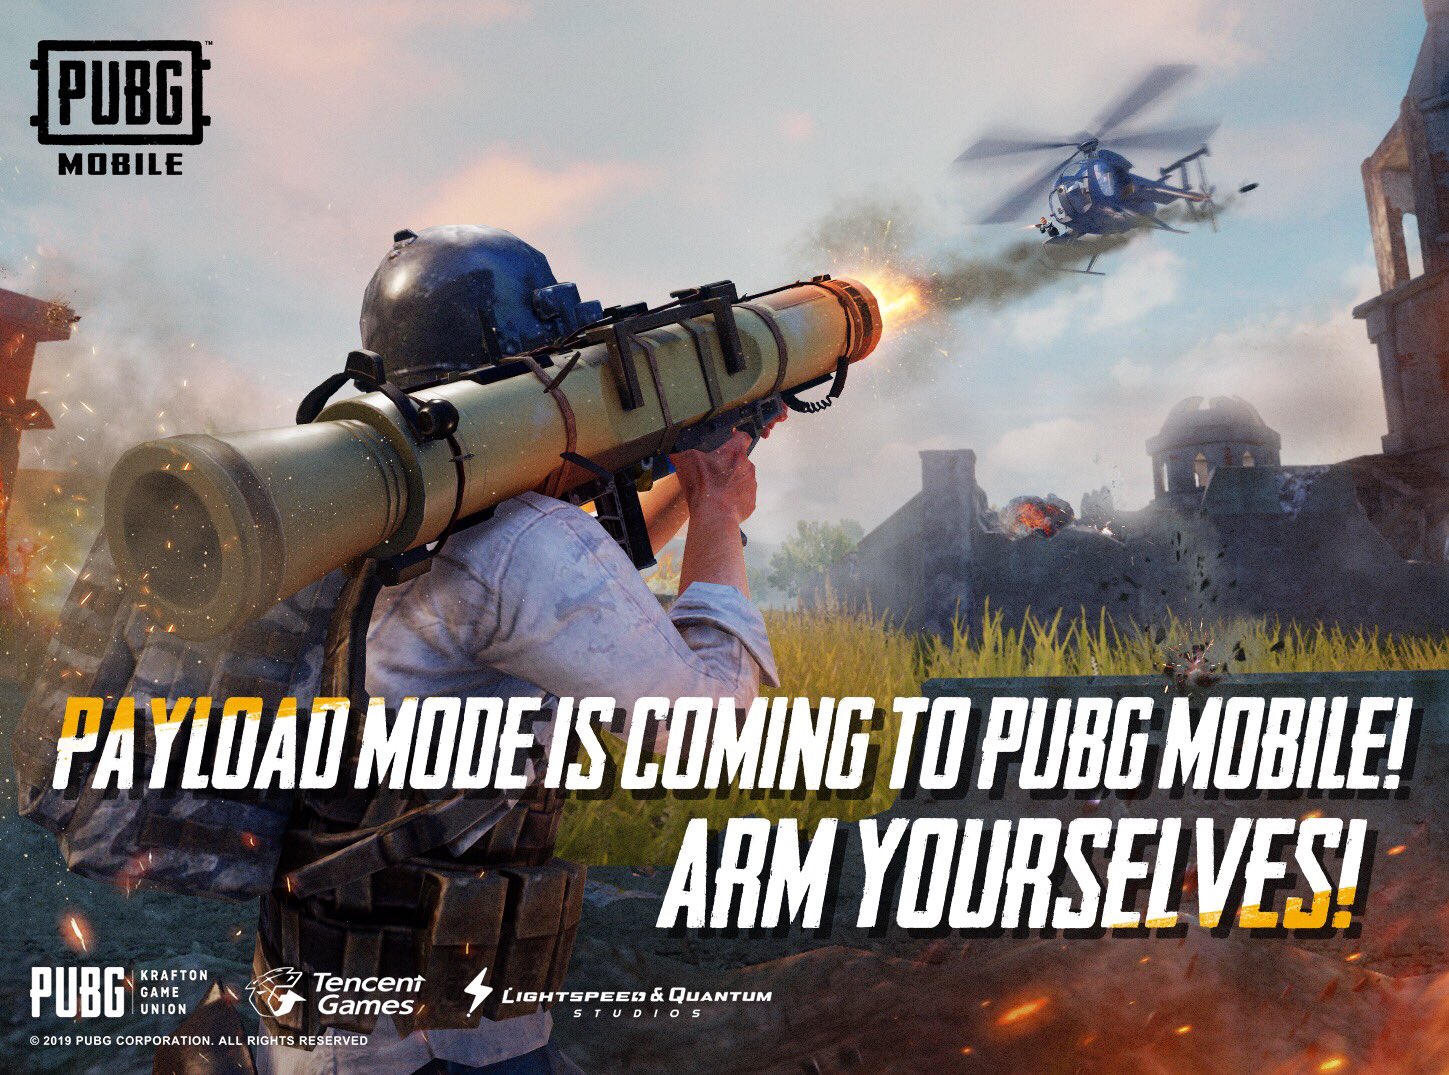 PUBG Mobile Payload Mode on 23 Oct